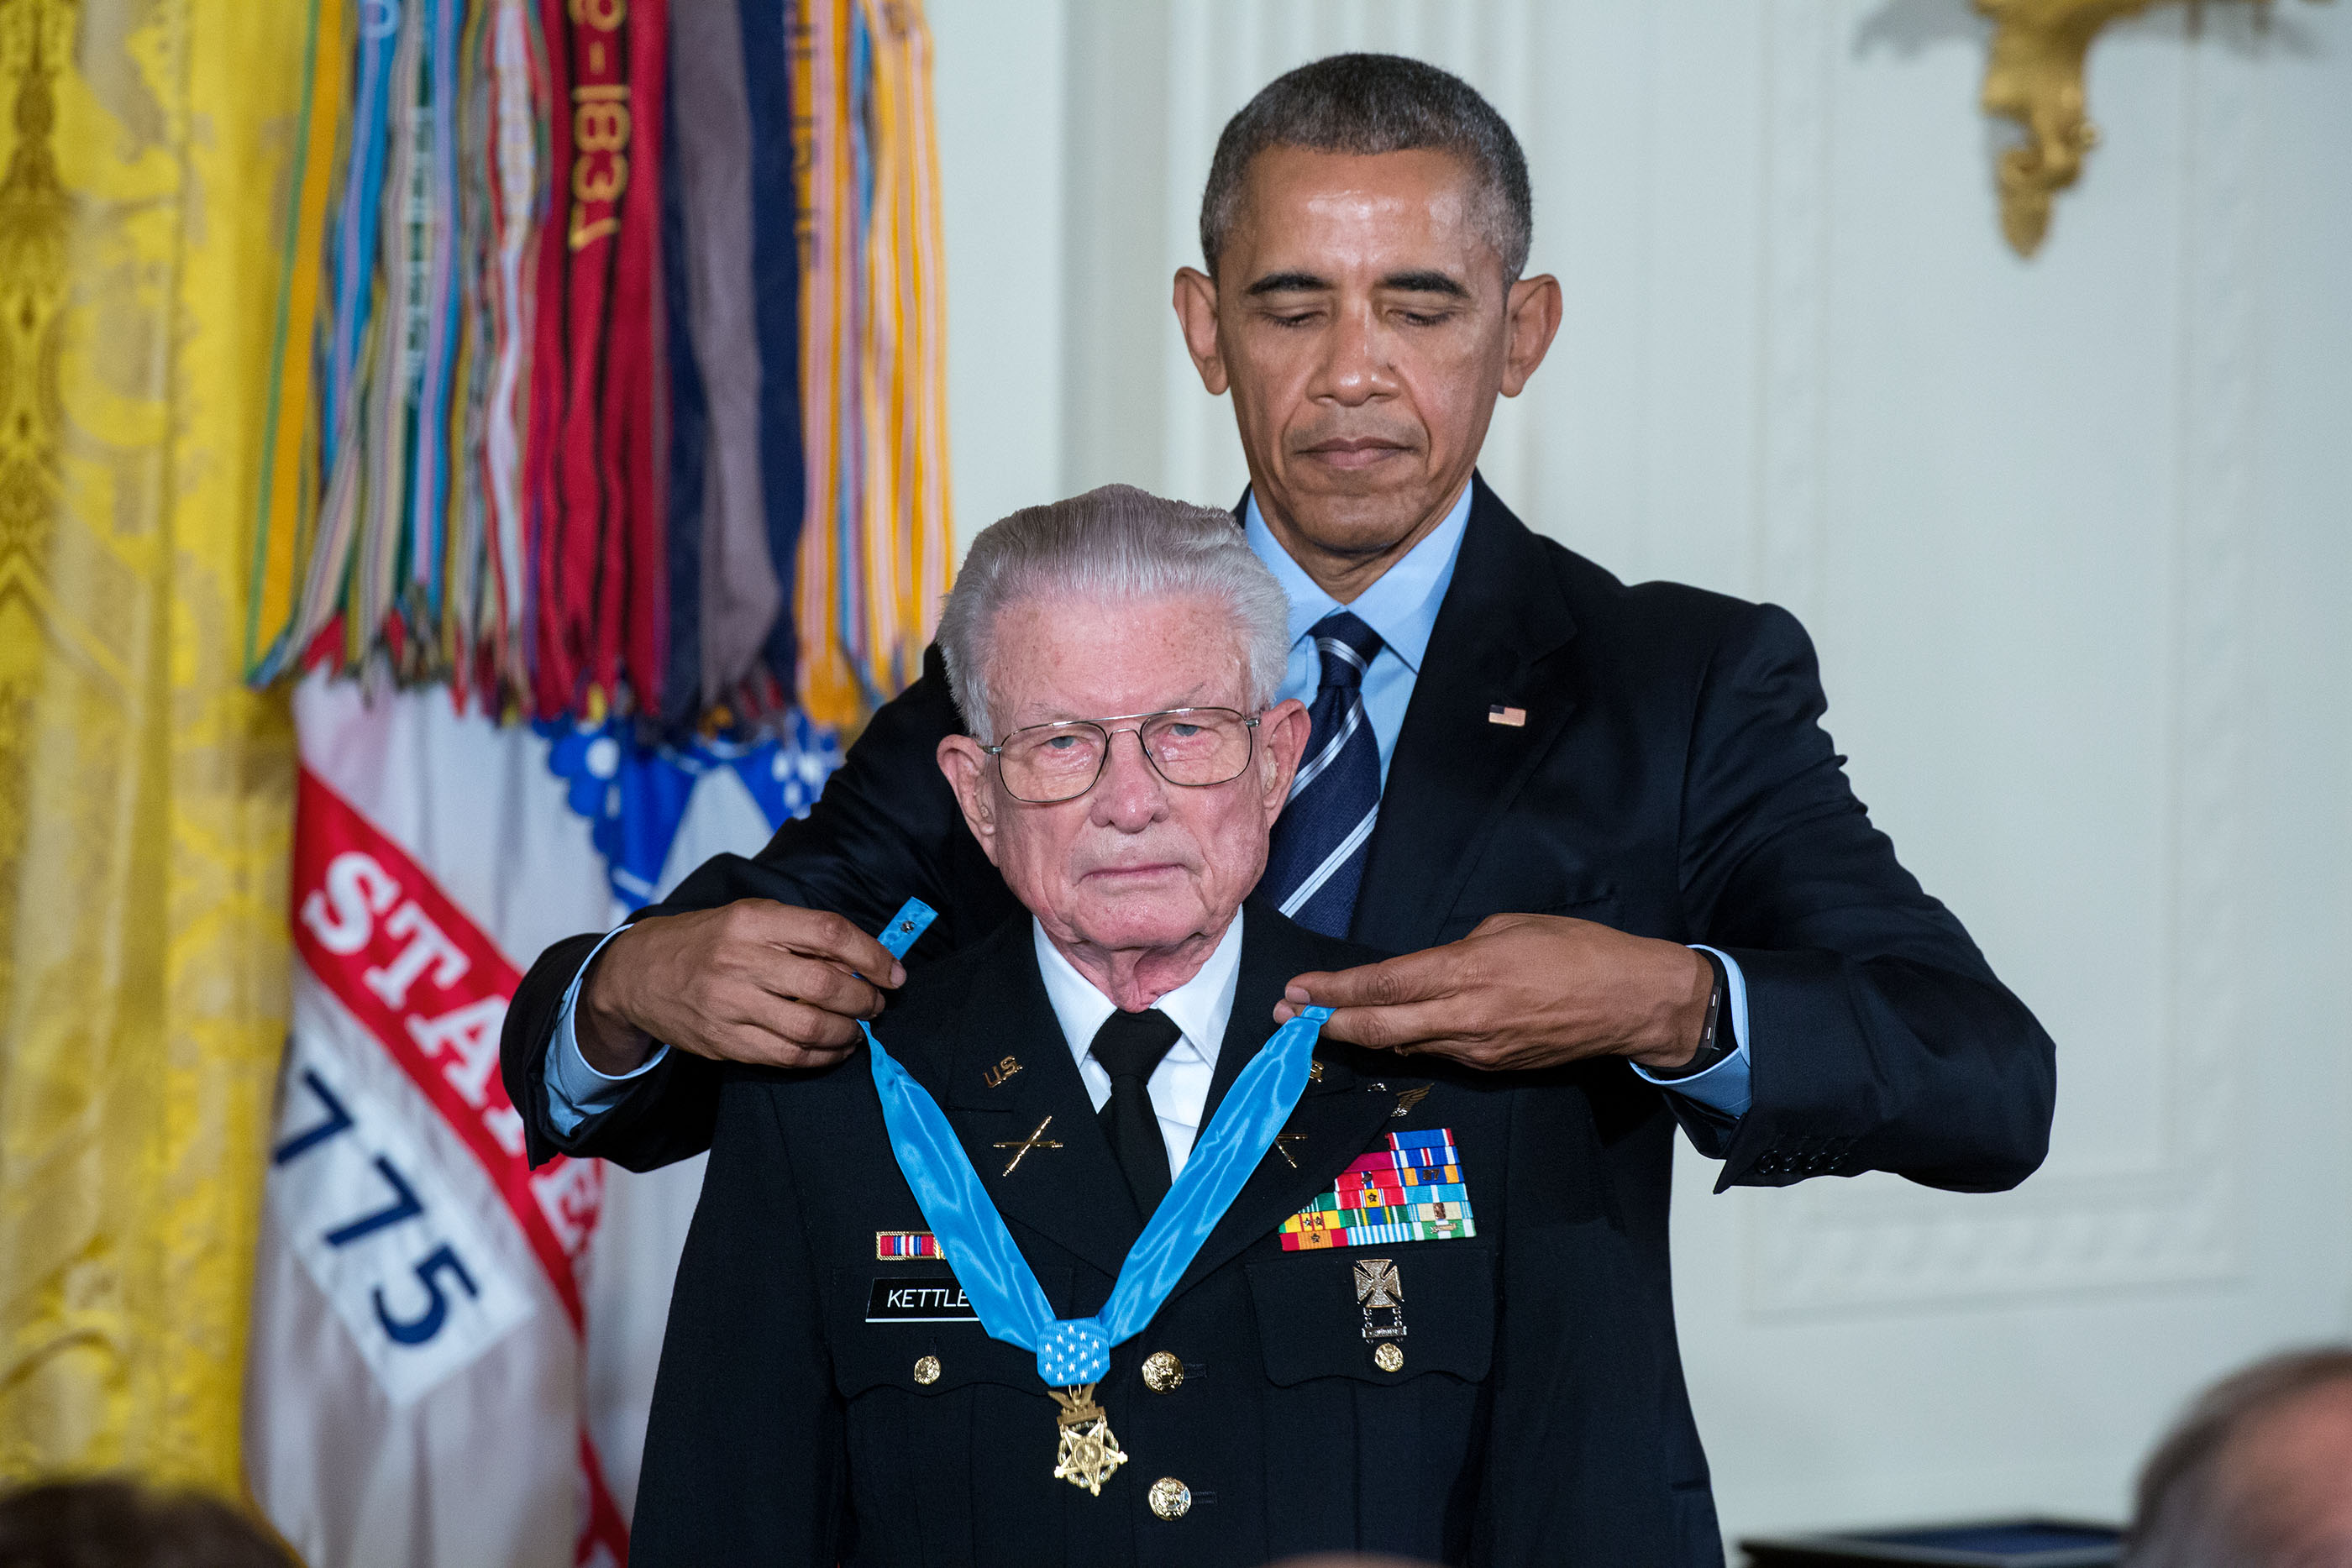 President Obama and retired U.S. Army Lieutenant Colonel Charles Kettles